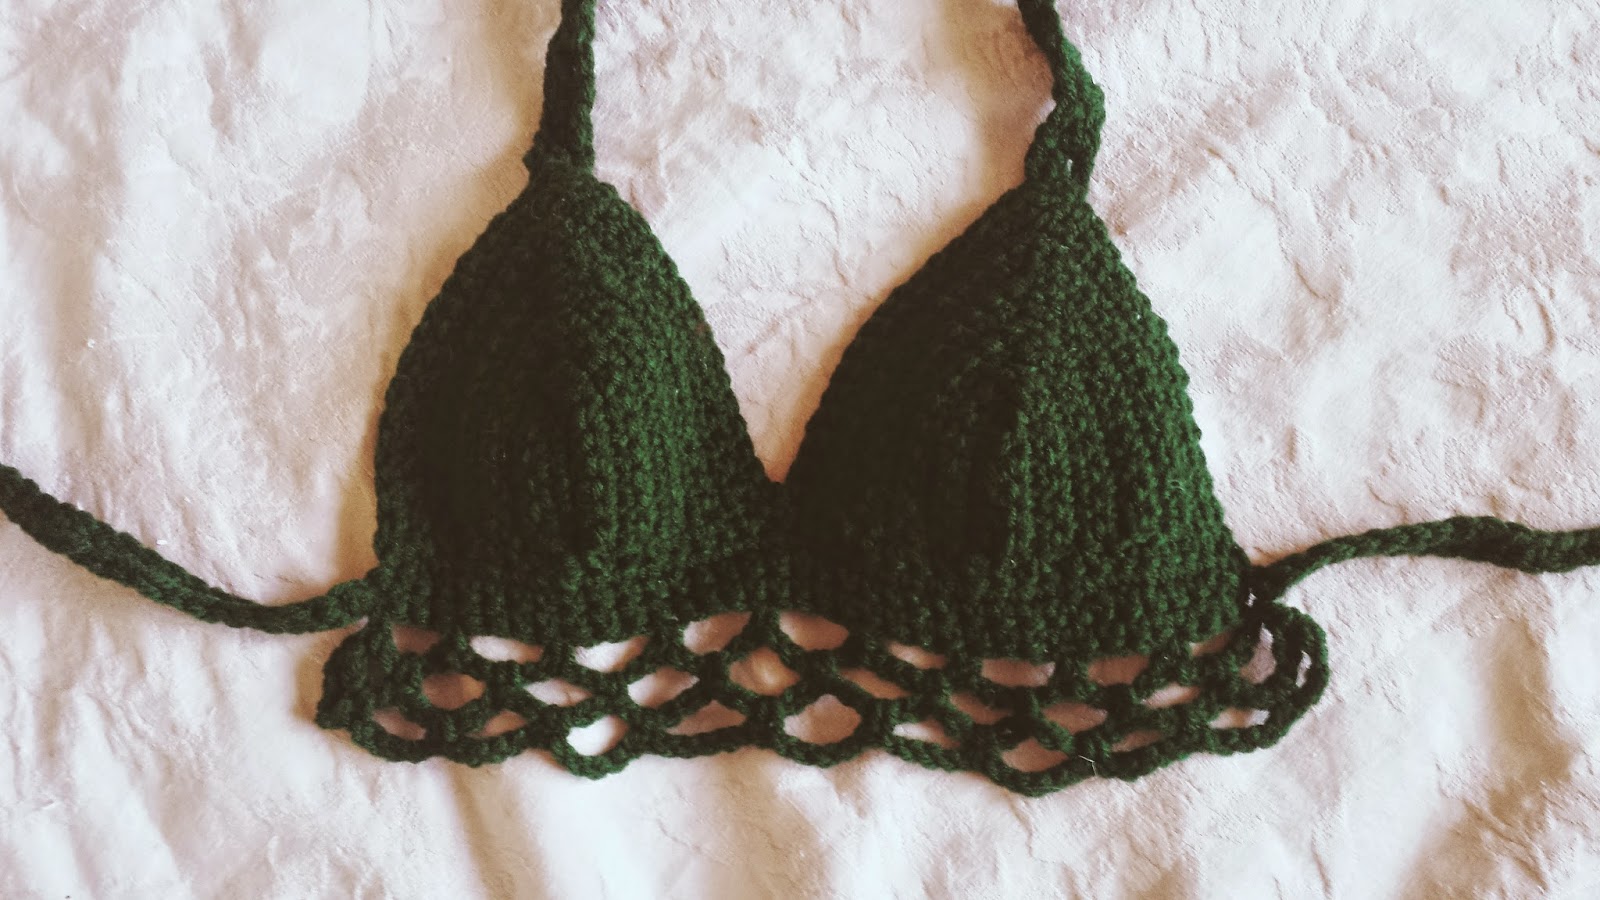 From A Thread: How to Crochet a simple bralette / crop top pattern